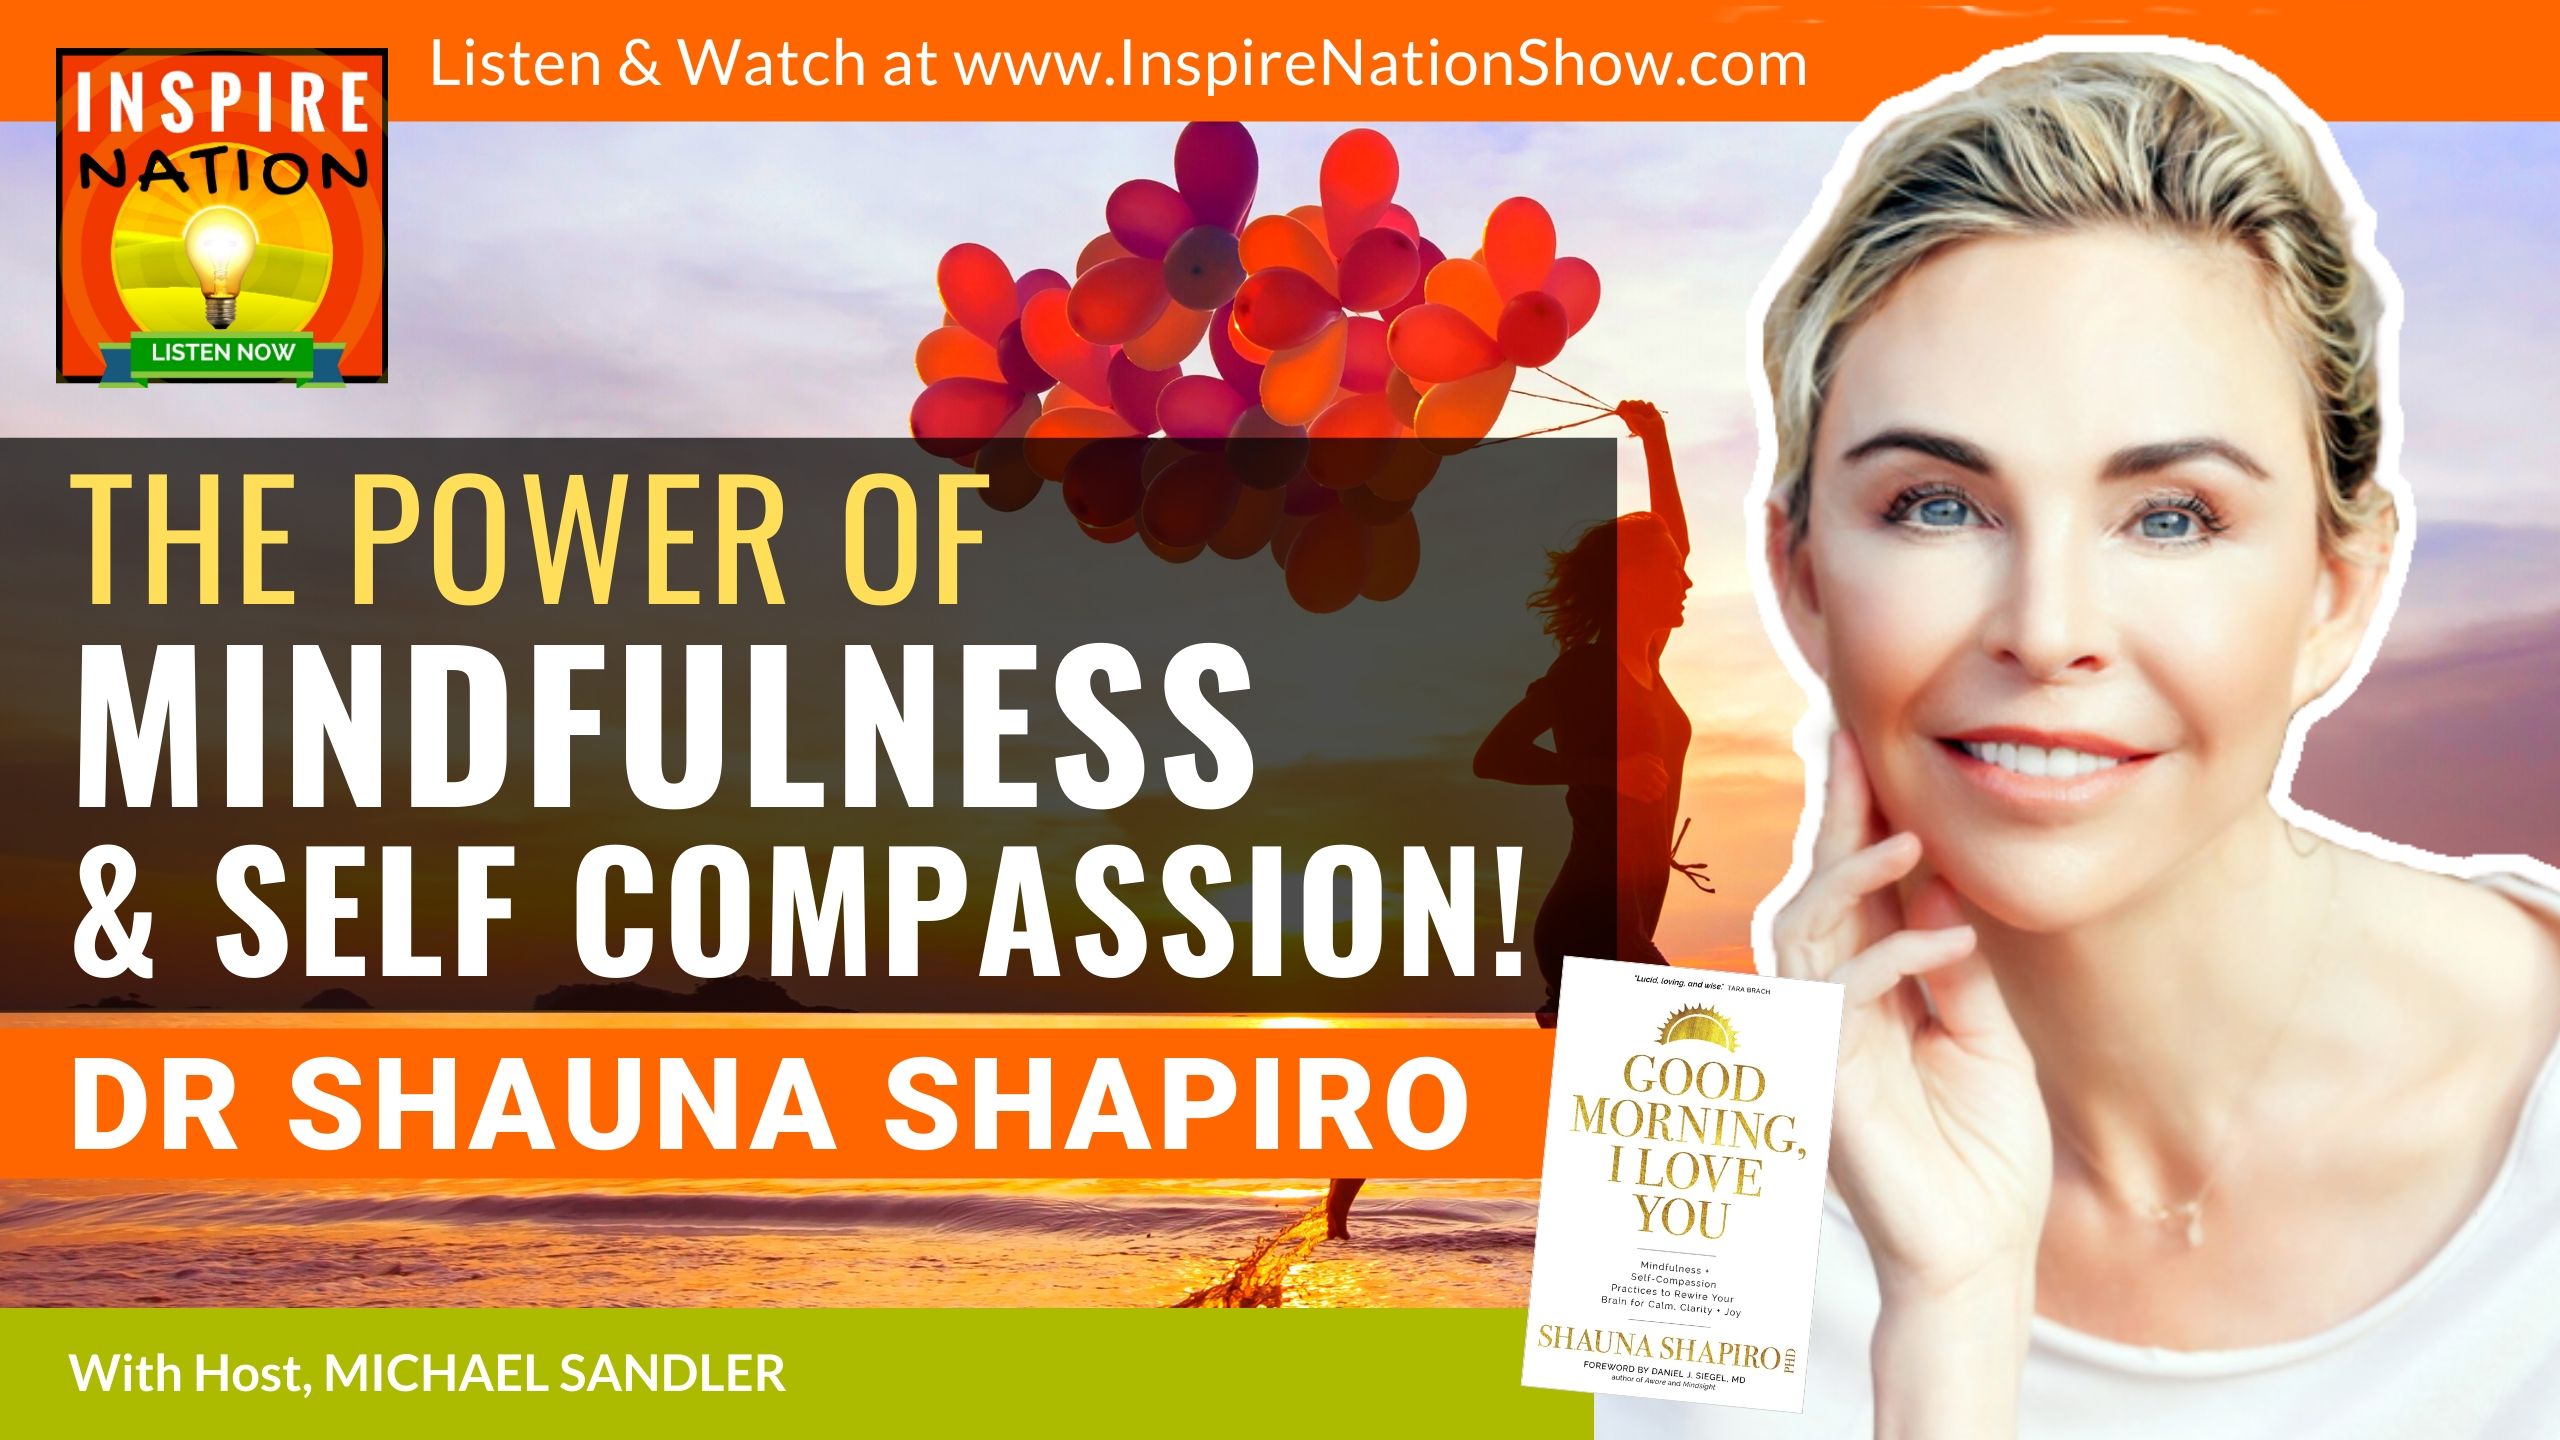 Michael Sandler interviews Dr Shauna Shapiro on how to rewire your mind for happiness through mindfulness!